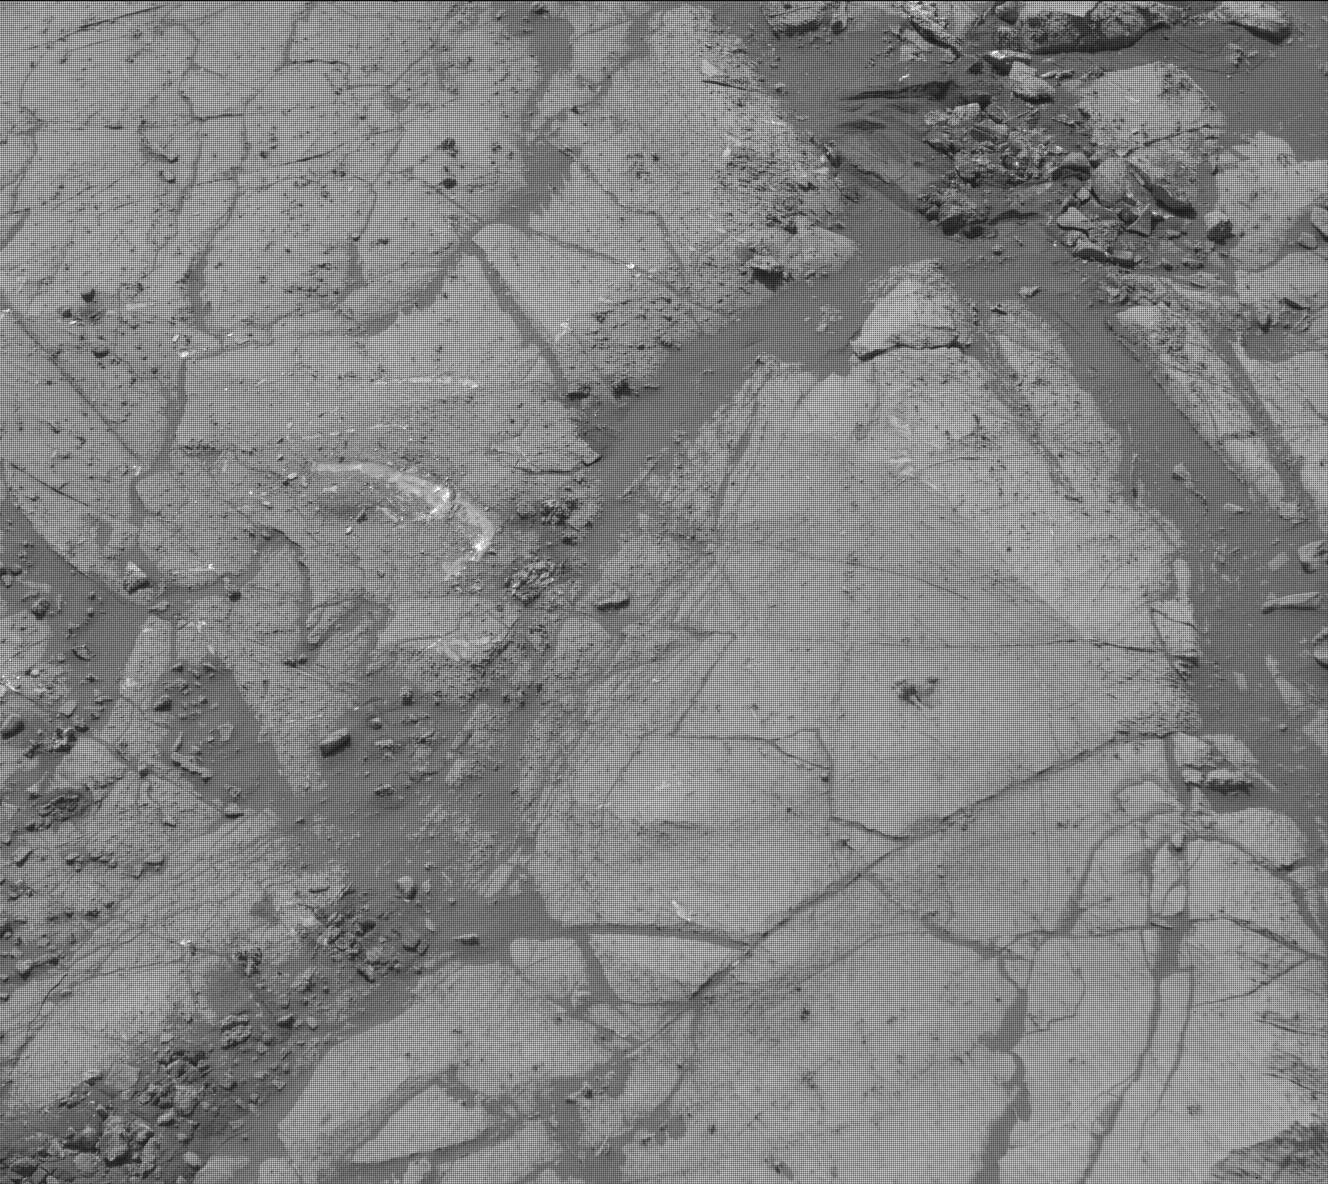 Sol 2666: Did the Rover Do That?